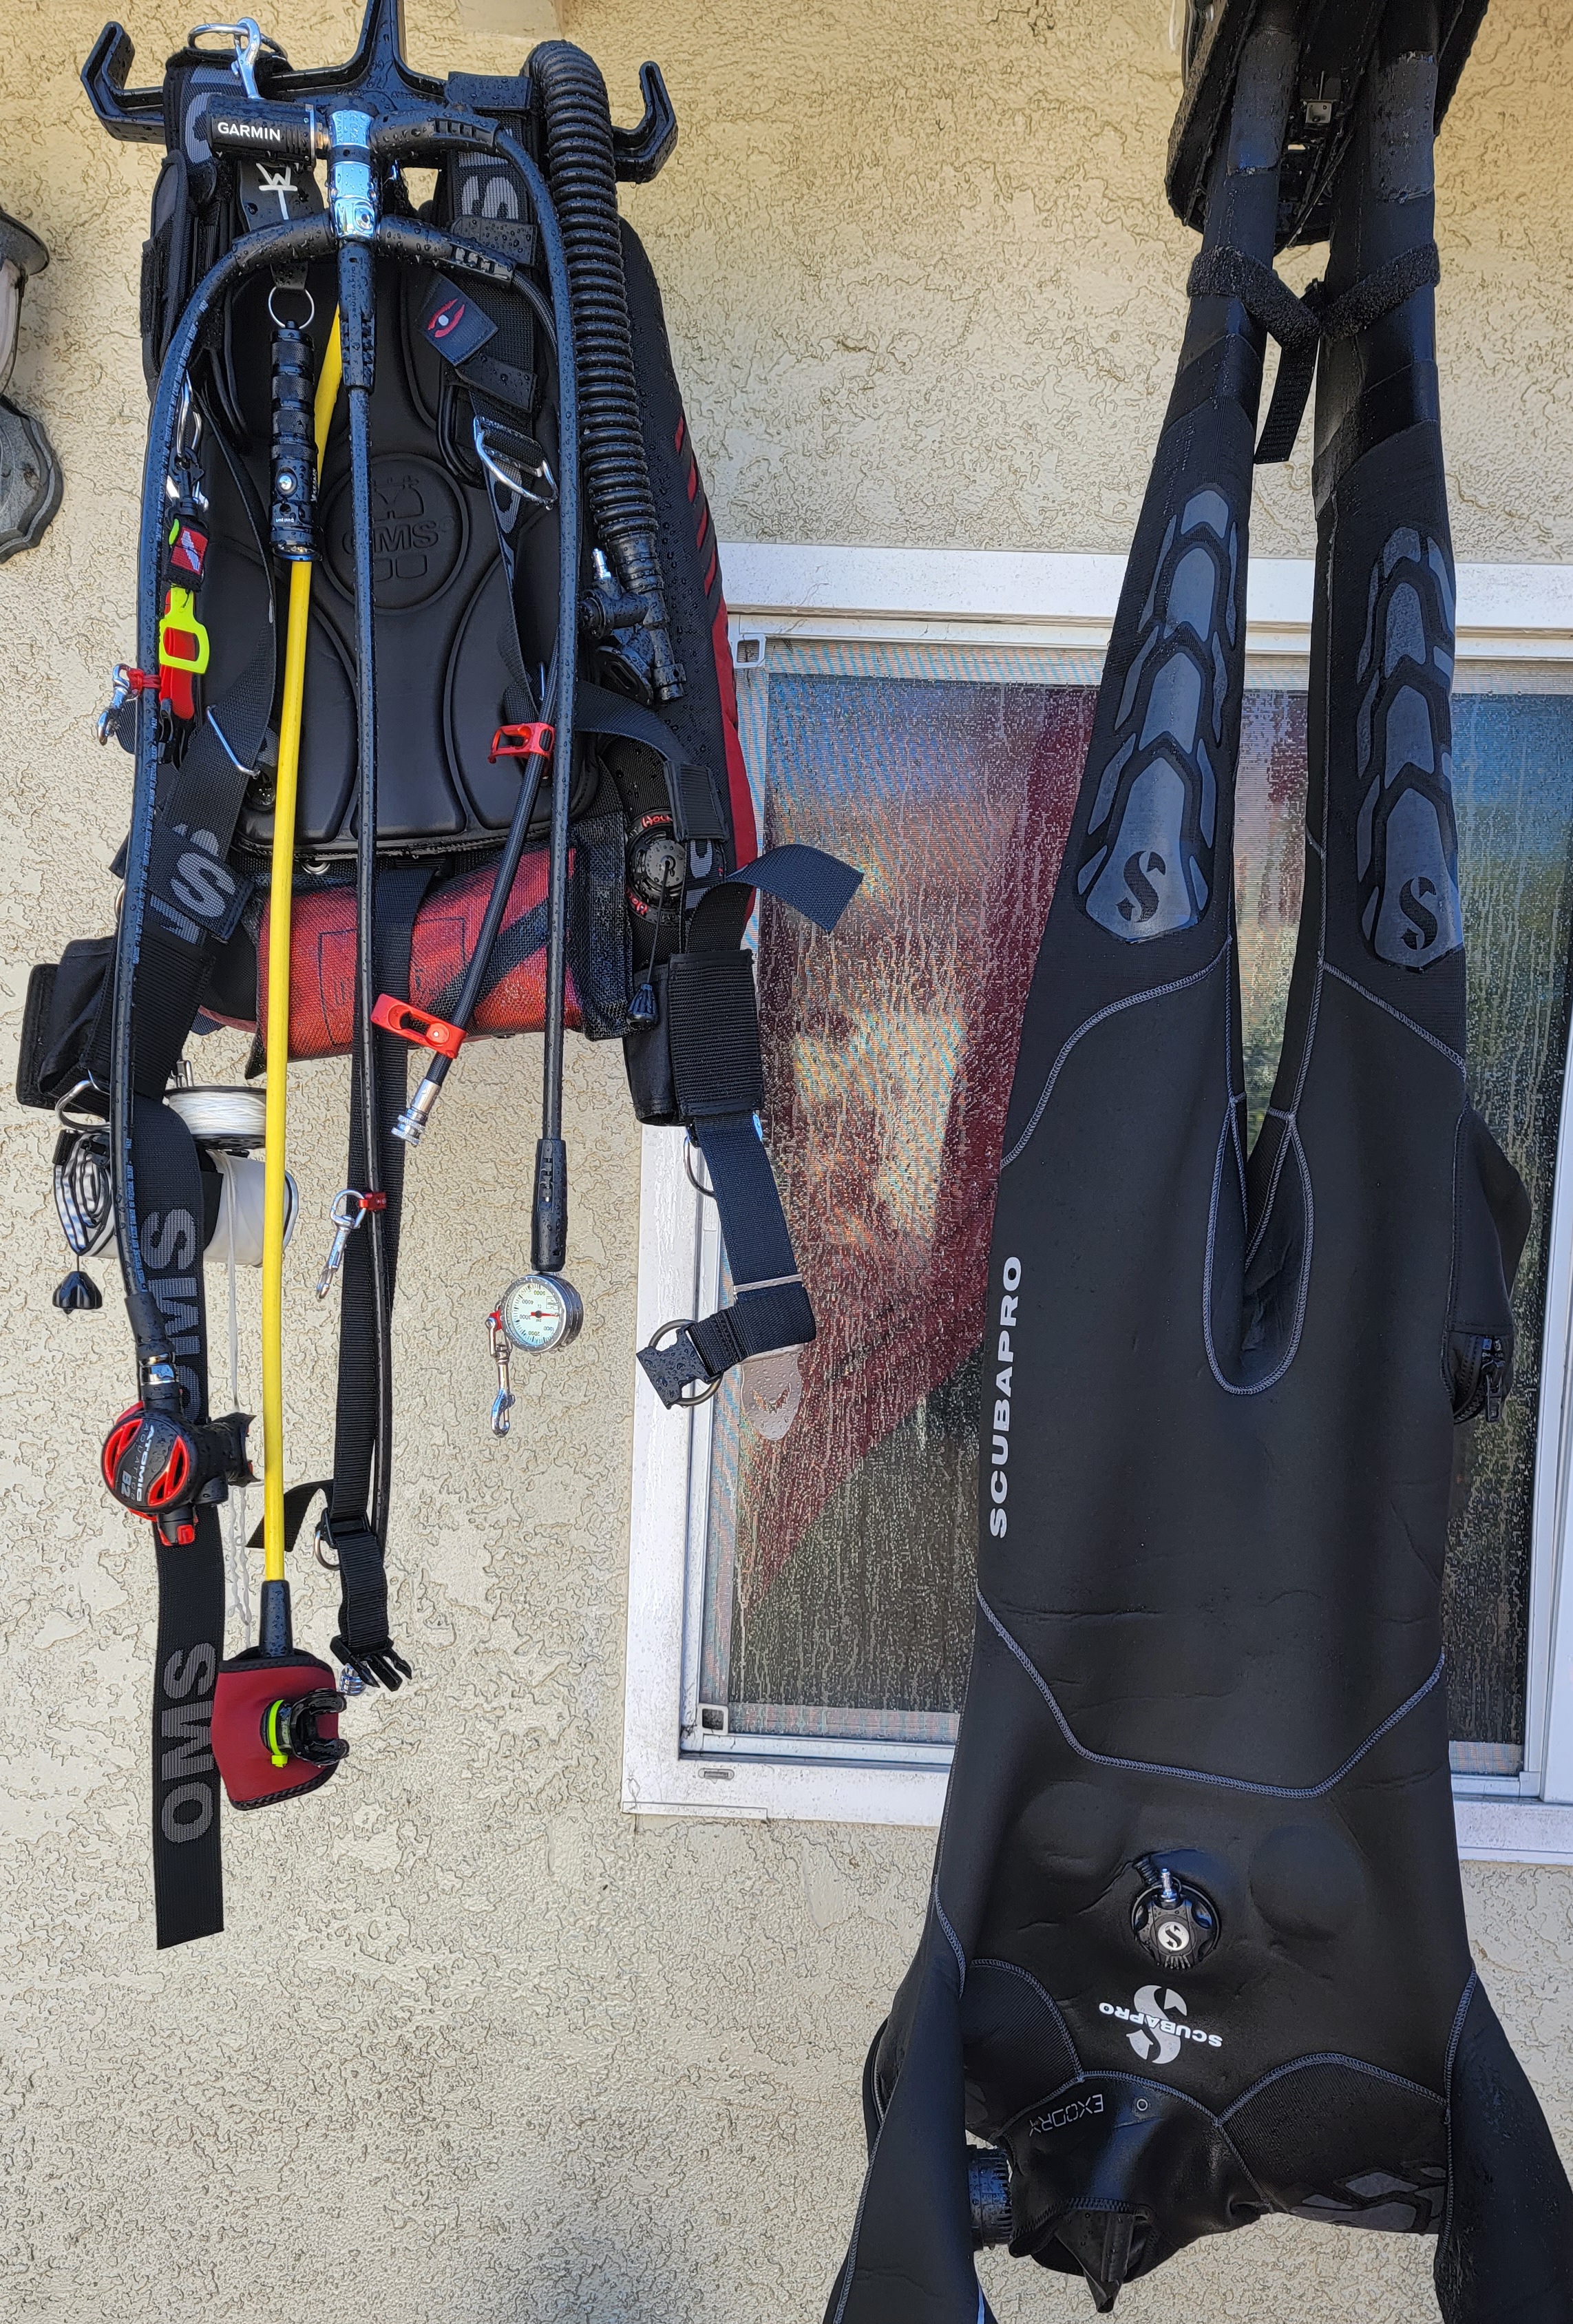 Tips for maintaining your neoprene wetsuit for scuba diving!